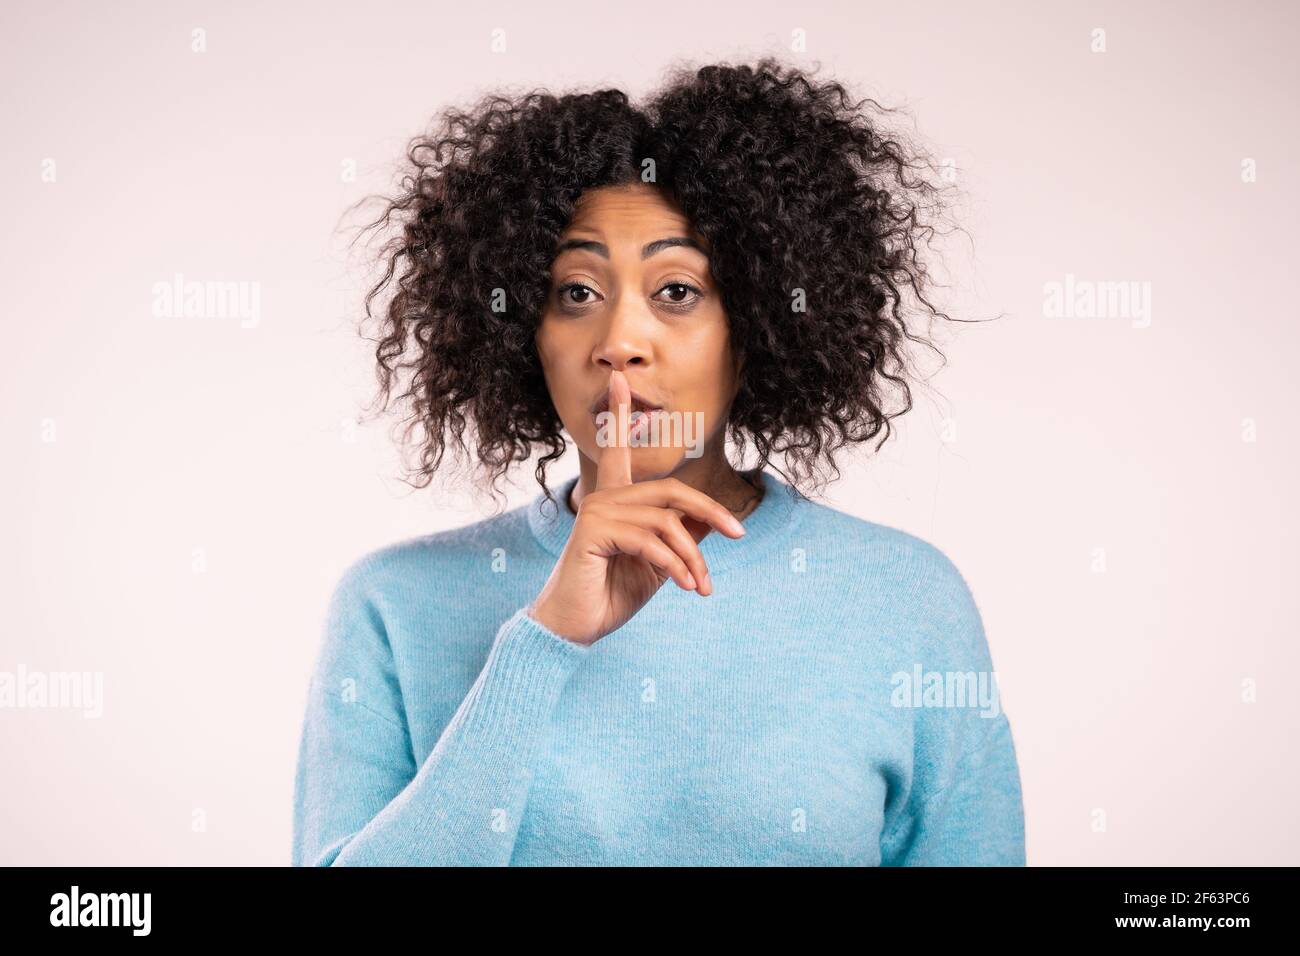 Smiling african woman with curly hair holding finger on her lips over white background. Gesture of shhh, secret, silence. Close up. Stock Photo